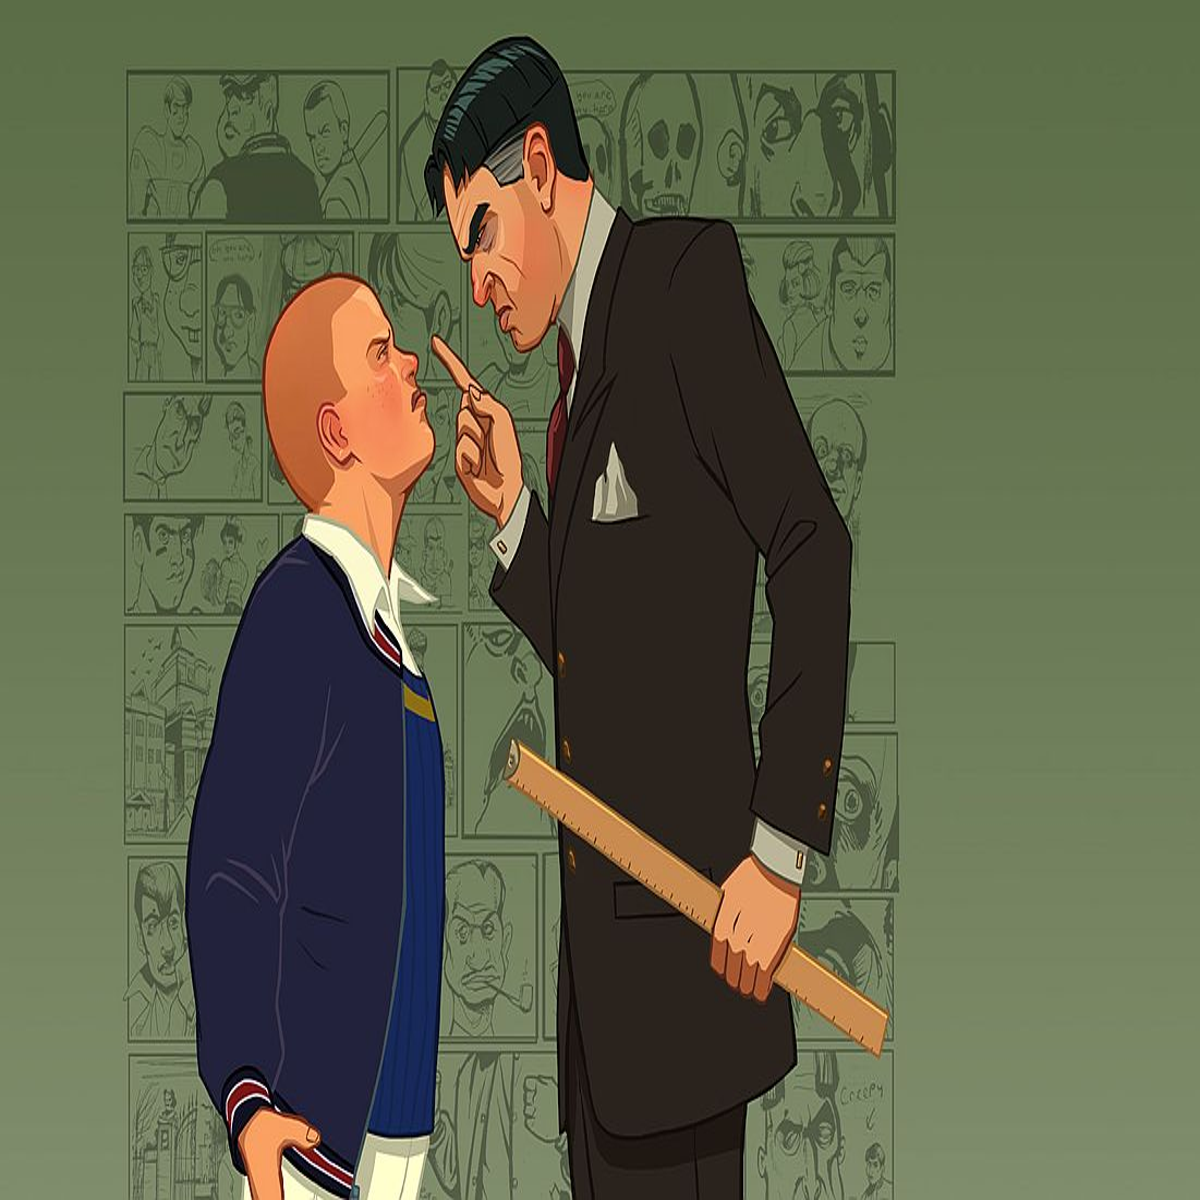 Bully 2: Kevin's Back Jack spotted on GameInformer, but it may not